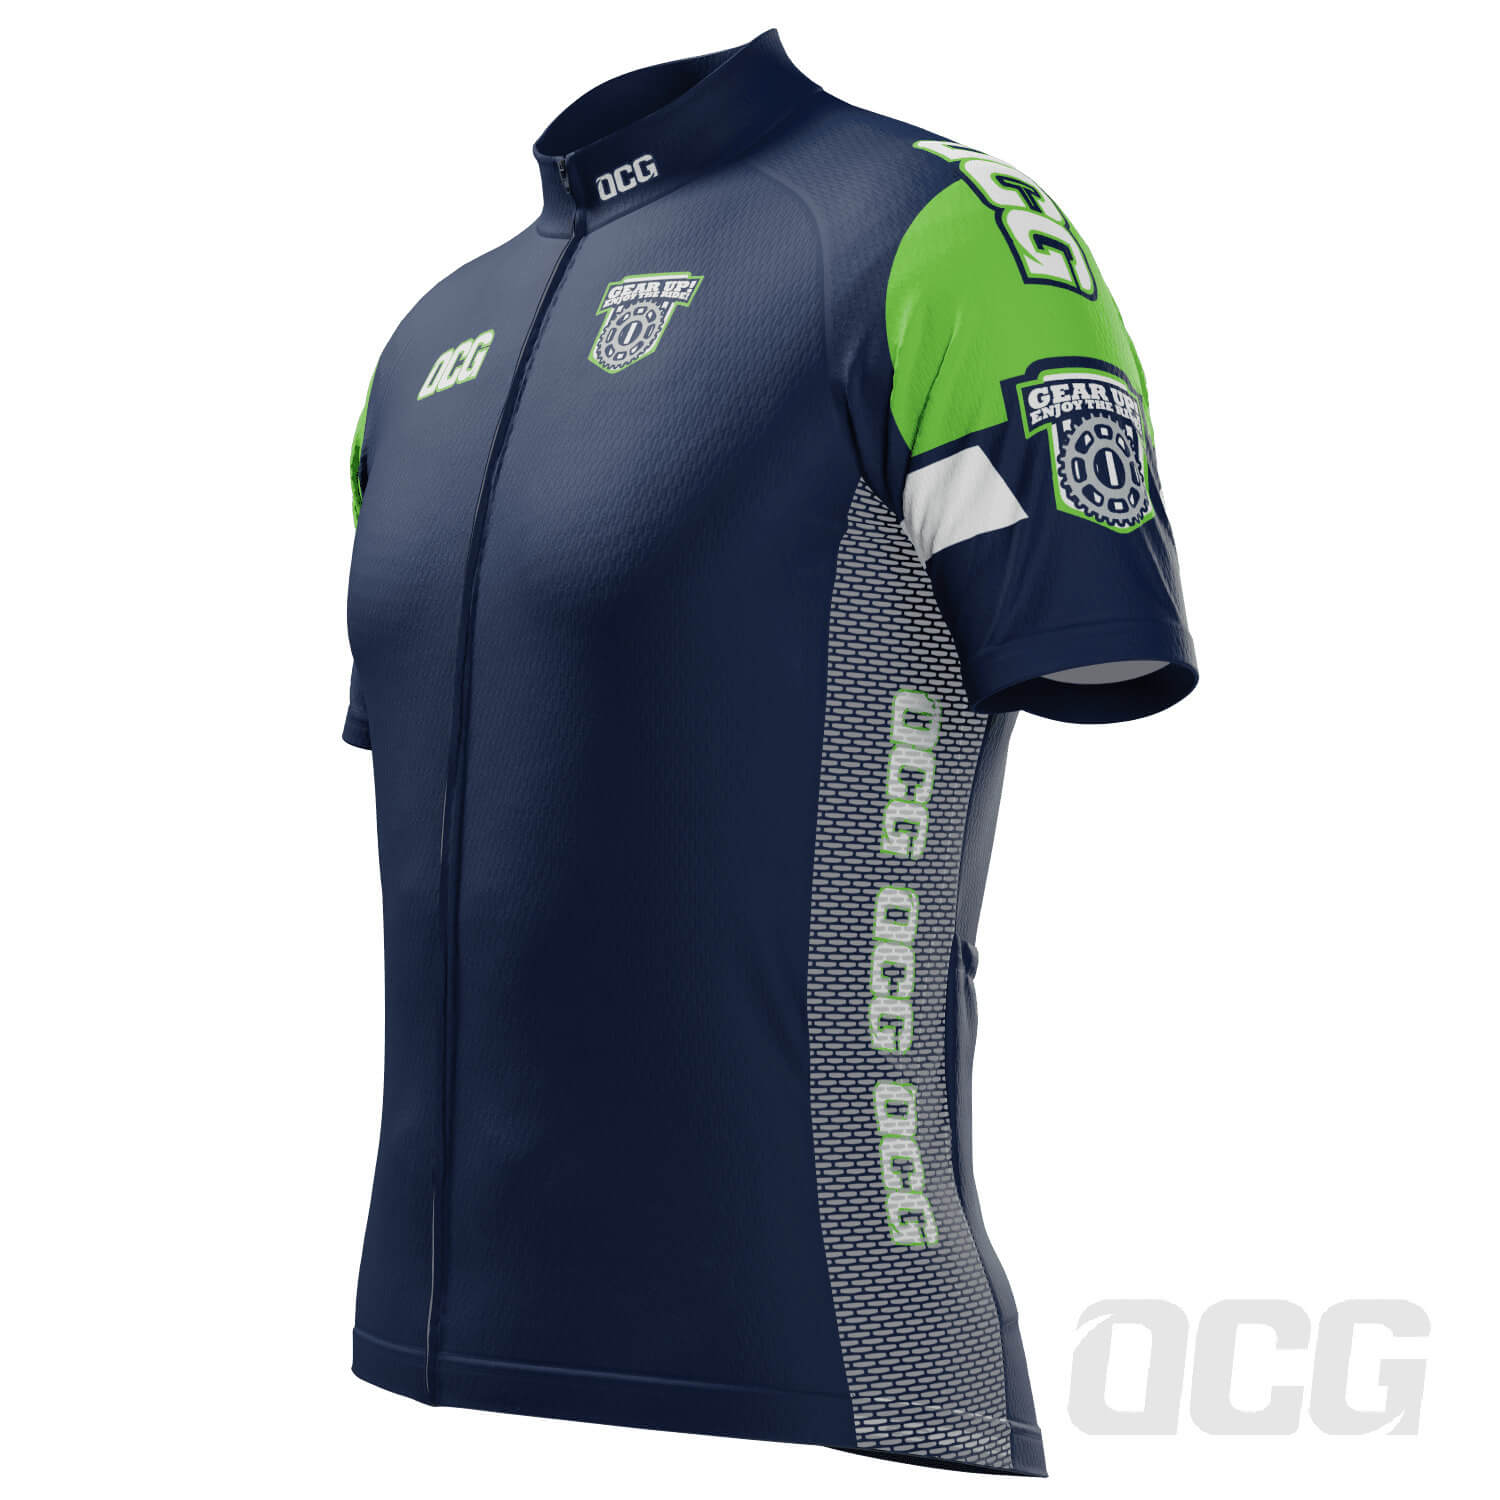 Men's The Seahawk Short Sleeve Cycling Jersey